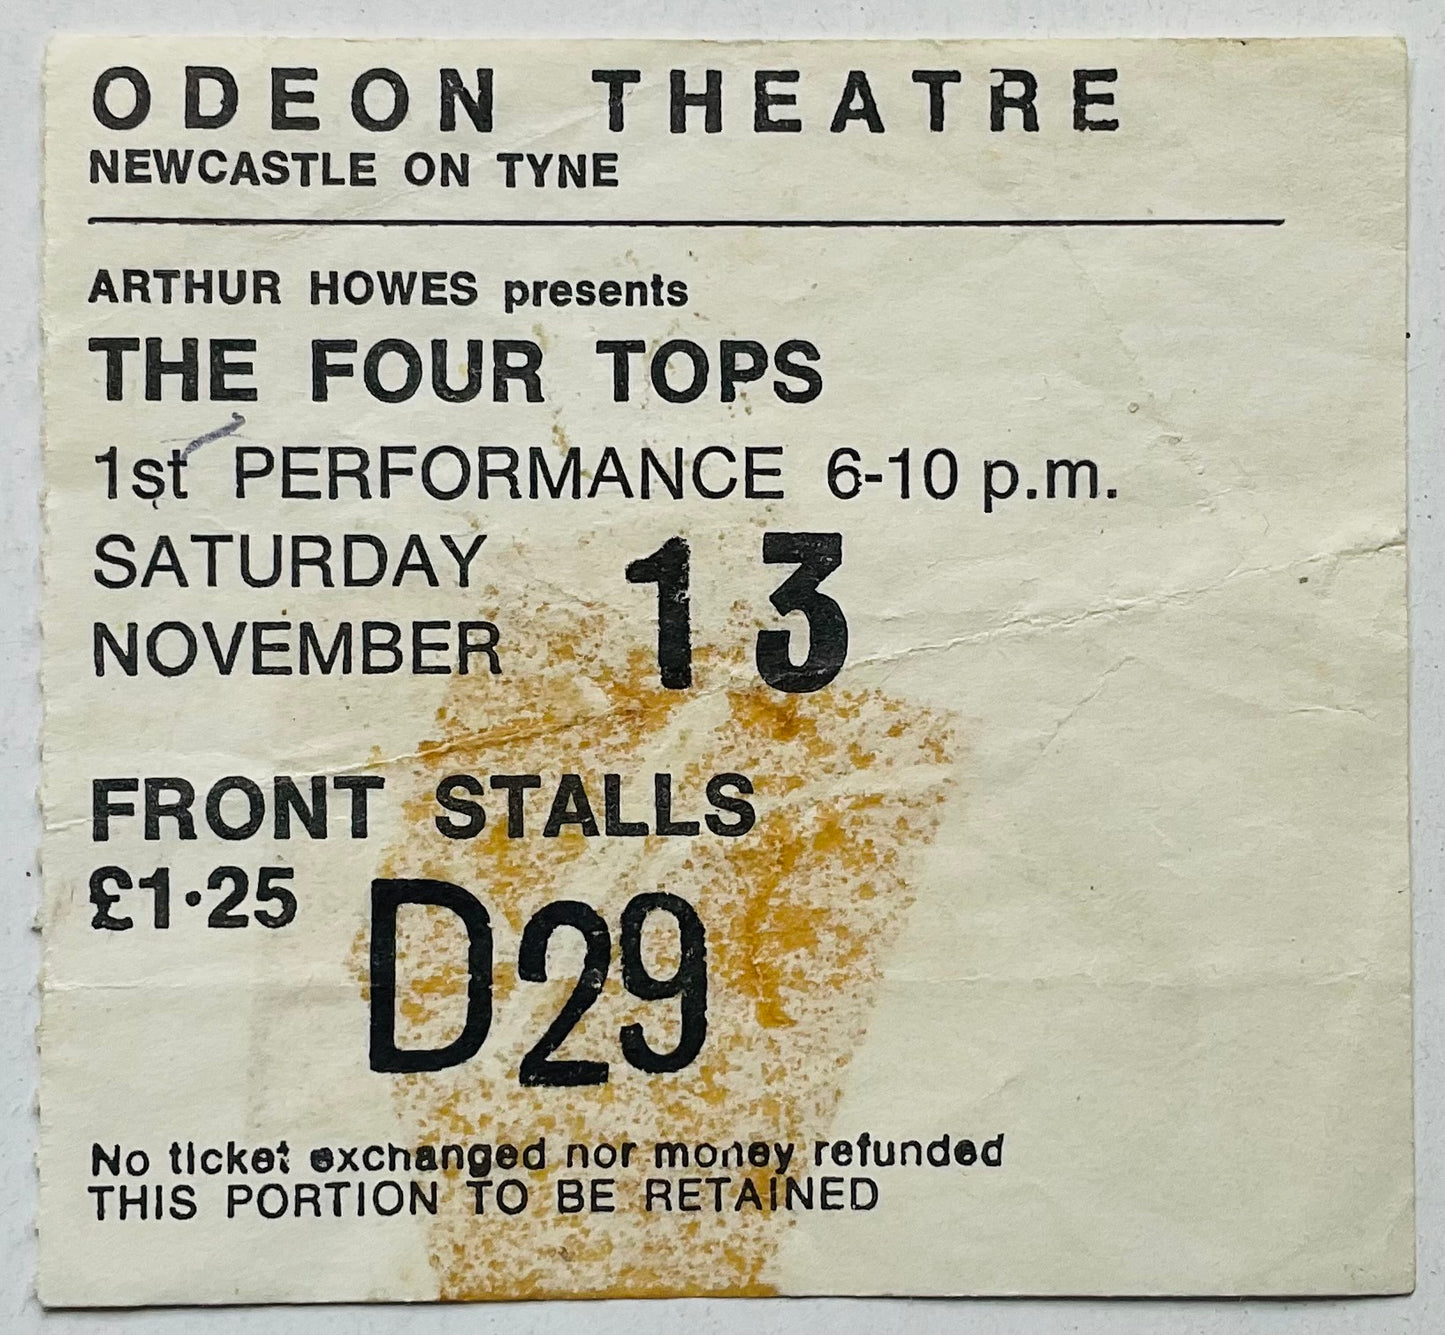 Four Tops Original Used Concert Ticket Odeon Theatre Newcastle 1971